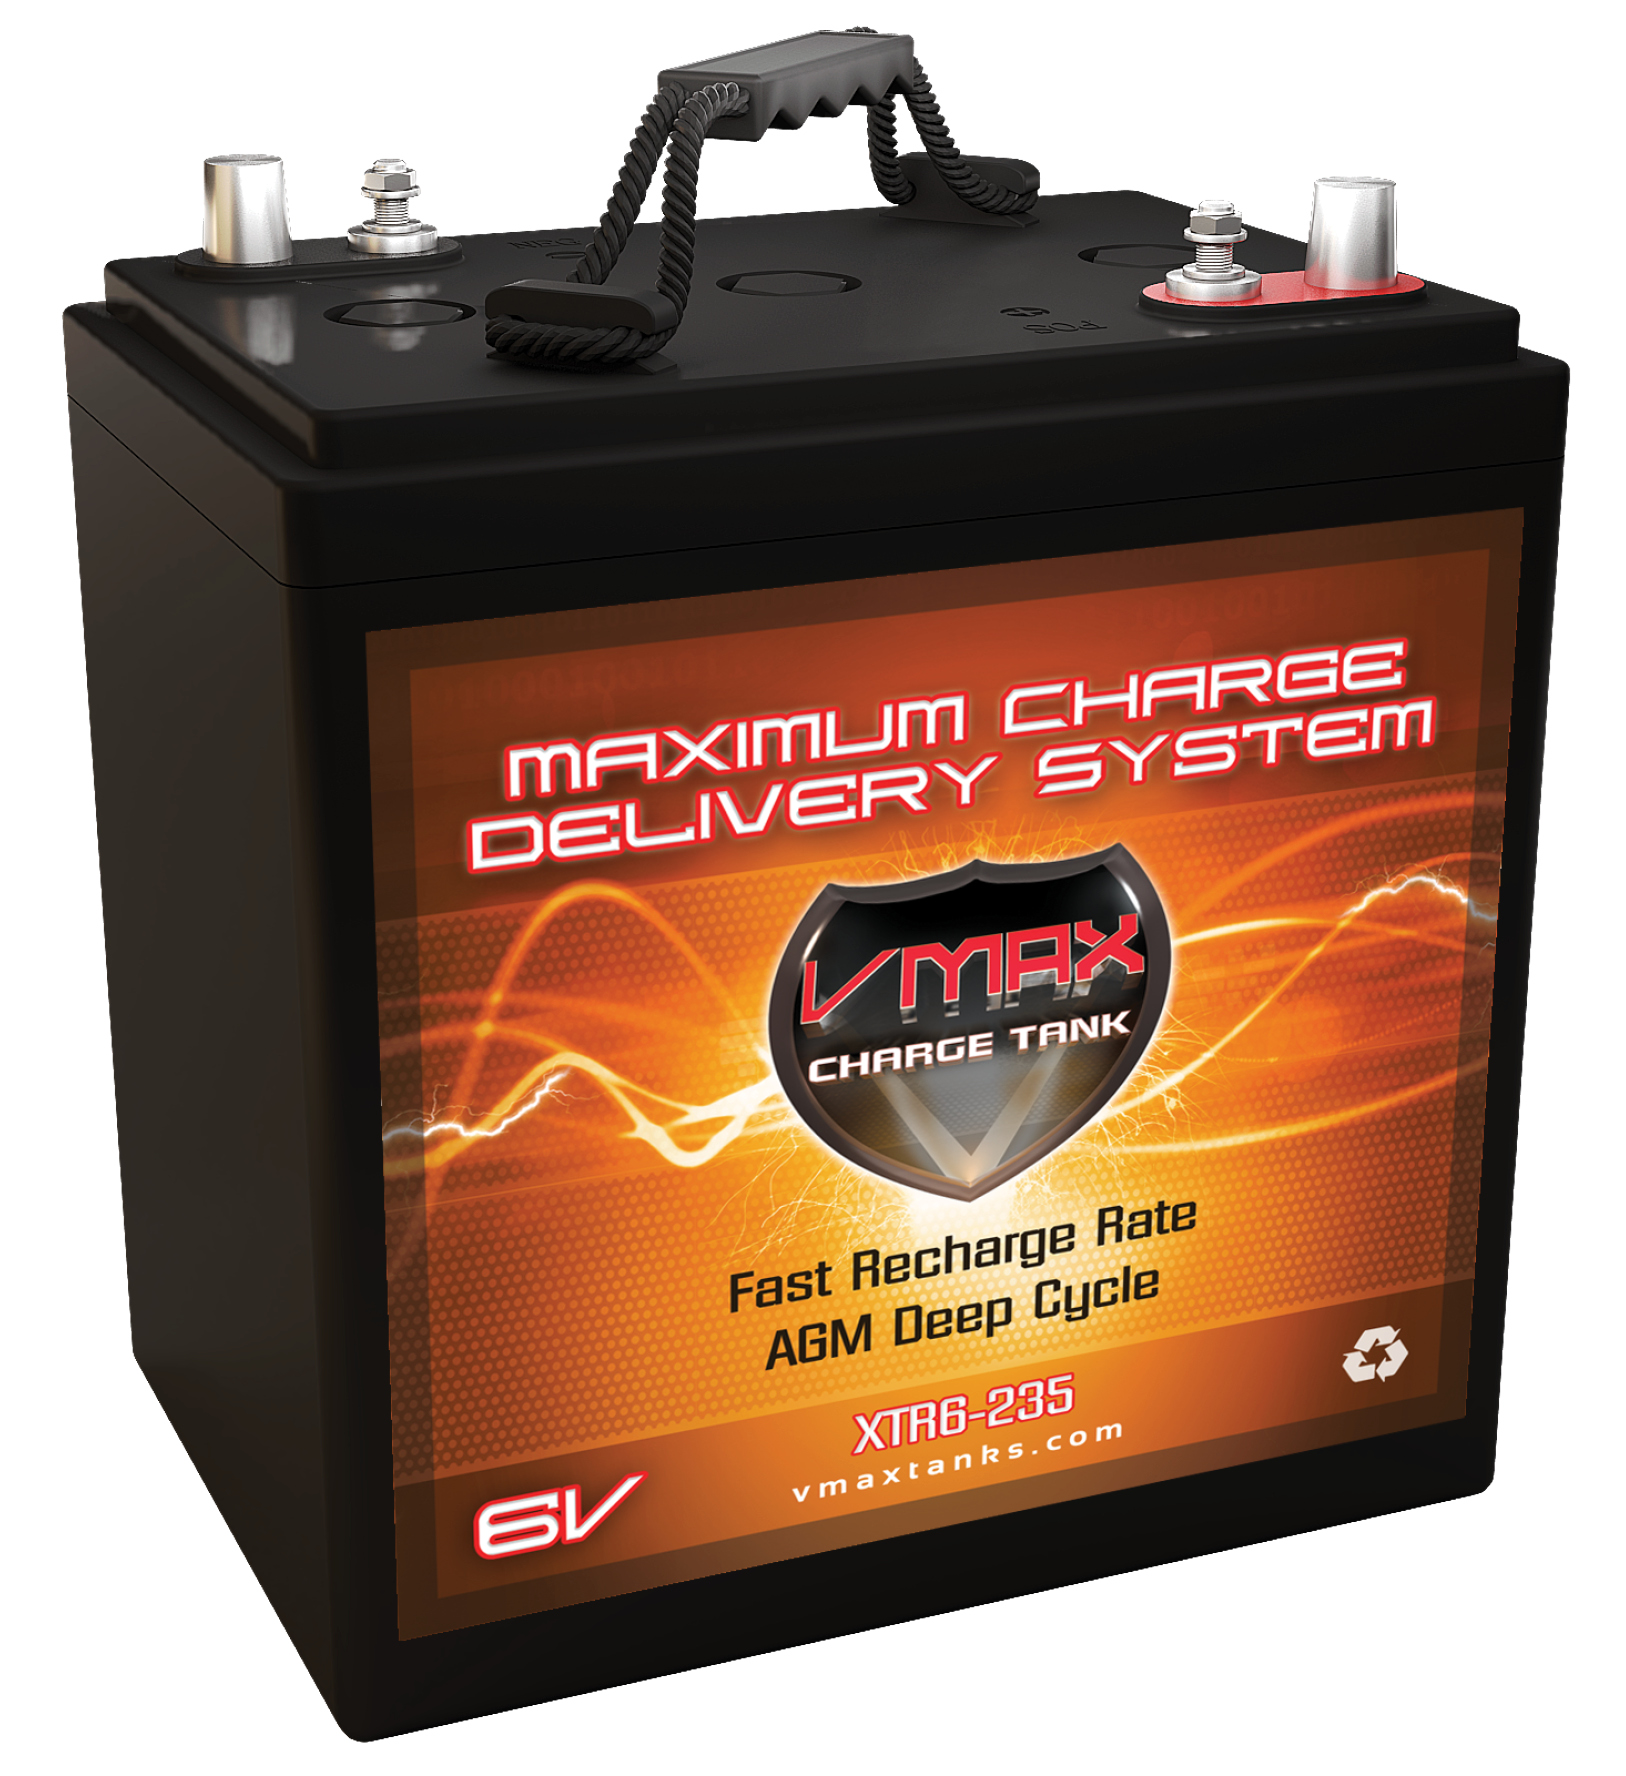 VMAX XTR6-235 Extreme Series 6 Volt 235Ah AGM Deep Cycle Group GC2 Battery replacement for NAPA 8143 - image 1 of 1